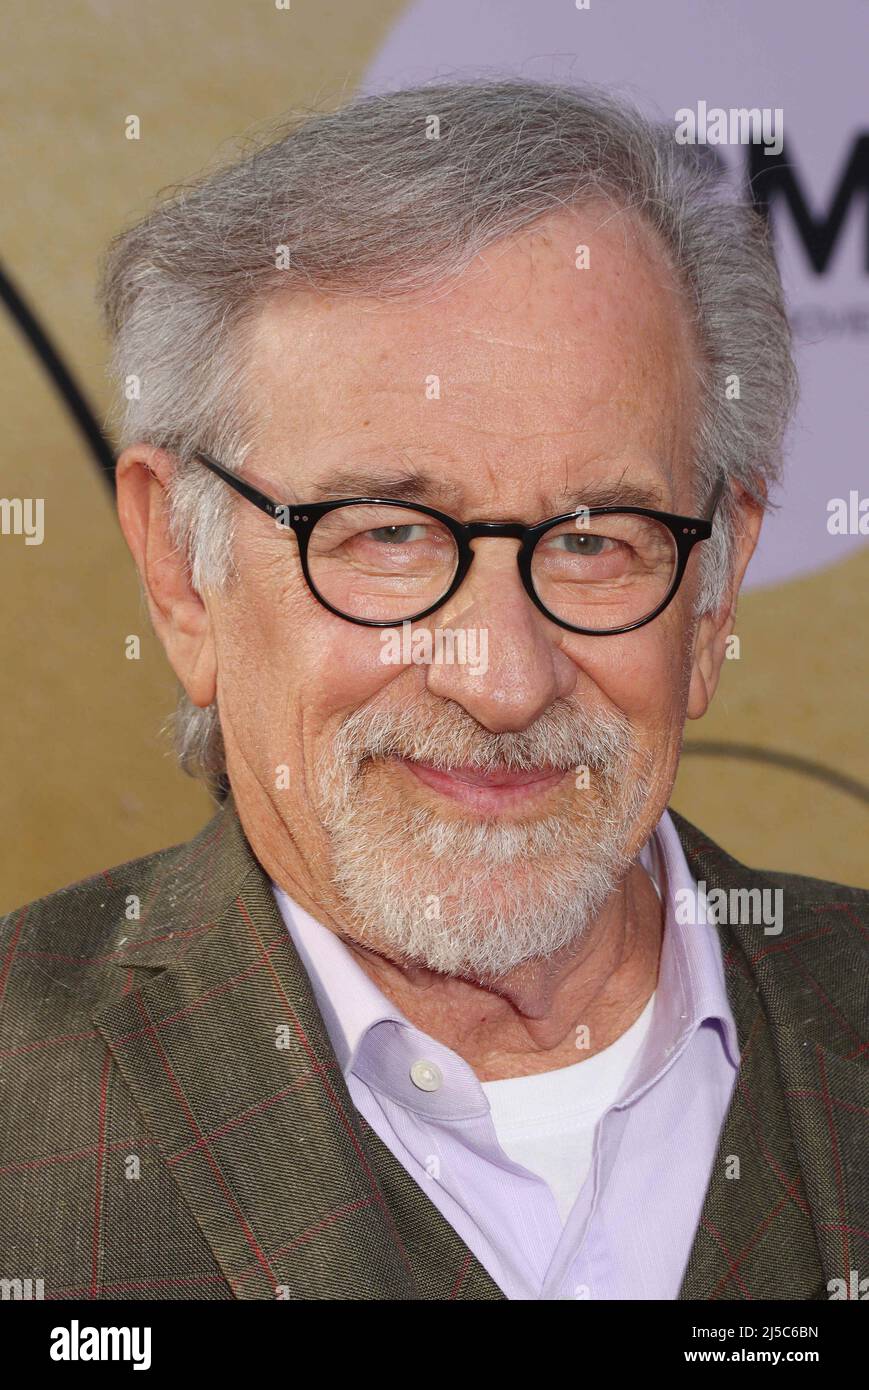 Los Angeles, USA. 21st Apr, 2022. Steven Spielberg 2022/04/21 The 40th Anniversary Screening of “E.T. the Extra-Terrestrial” held at TCL Chinese Theatre in Hollywood, CA, Credit: Cronos/Alamy Live News Stock Photo